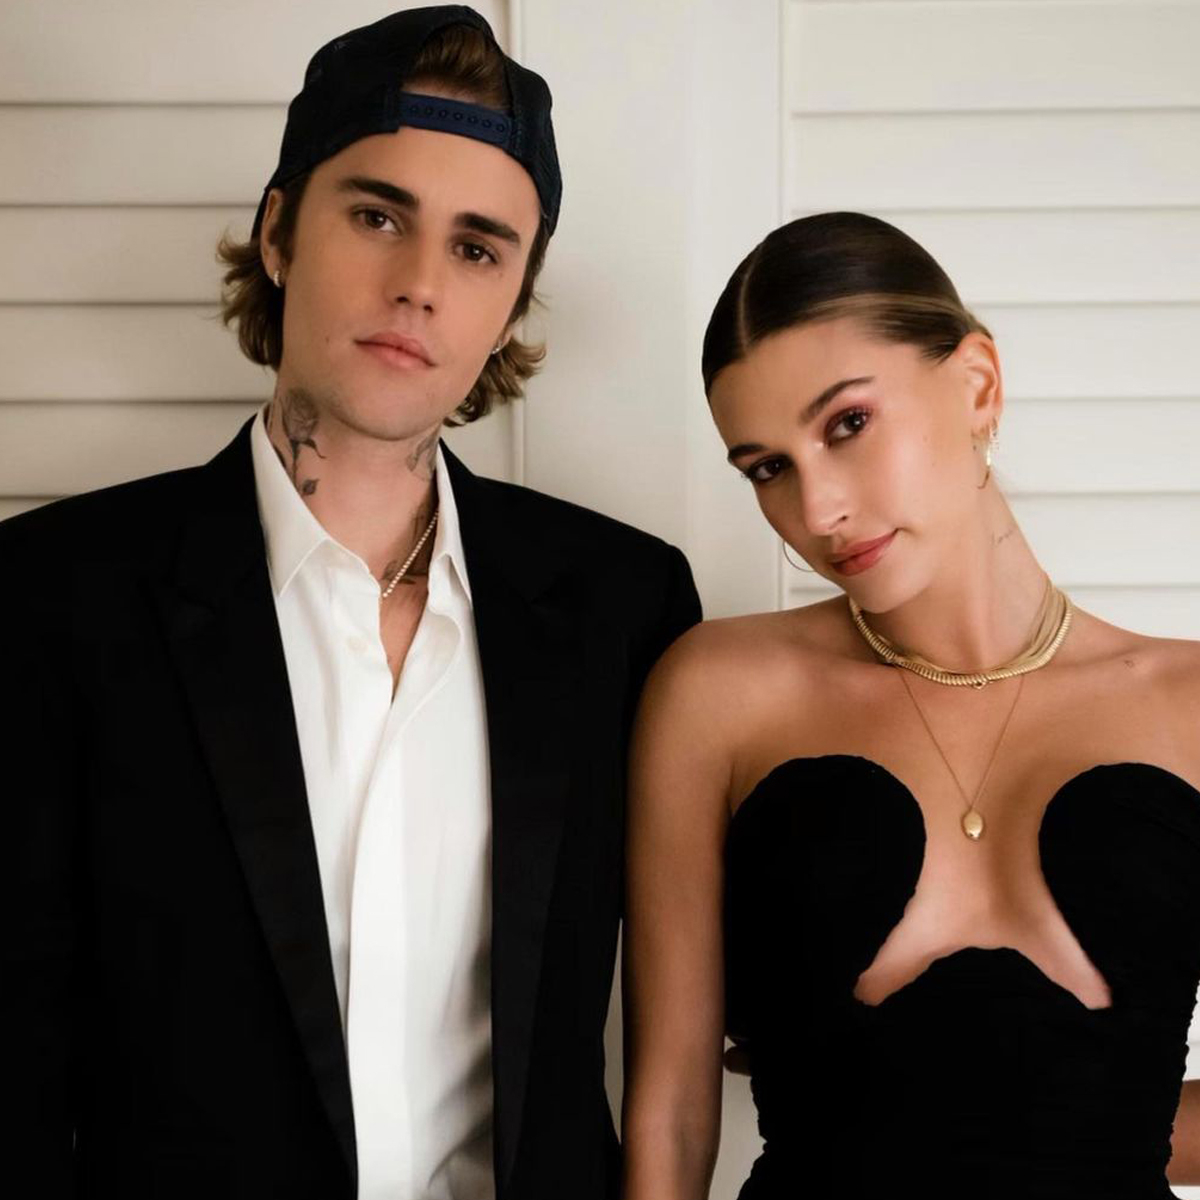 Hailey Bieber Is Justins Muse In Intimate Music Video For “anyone” E